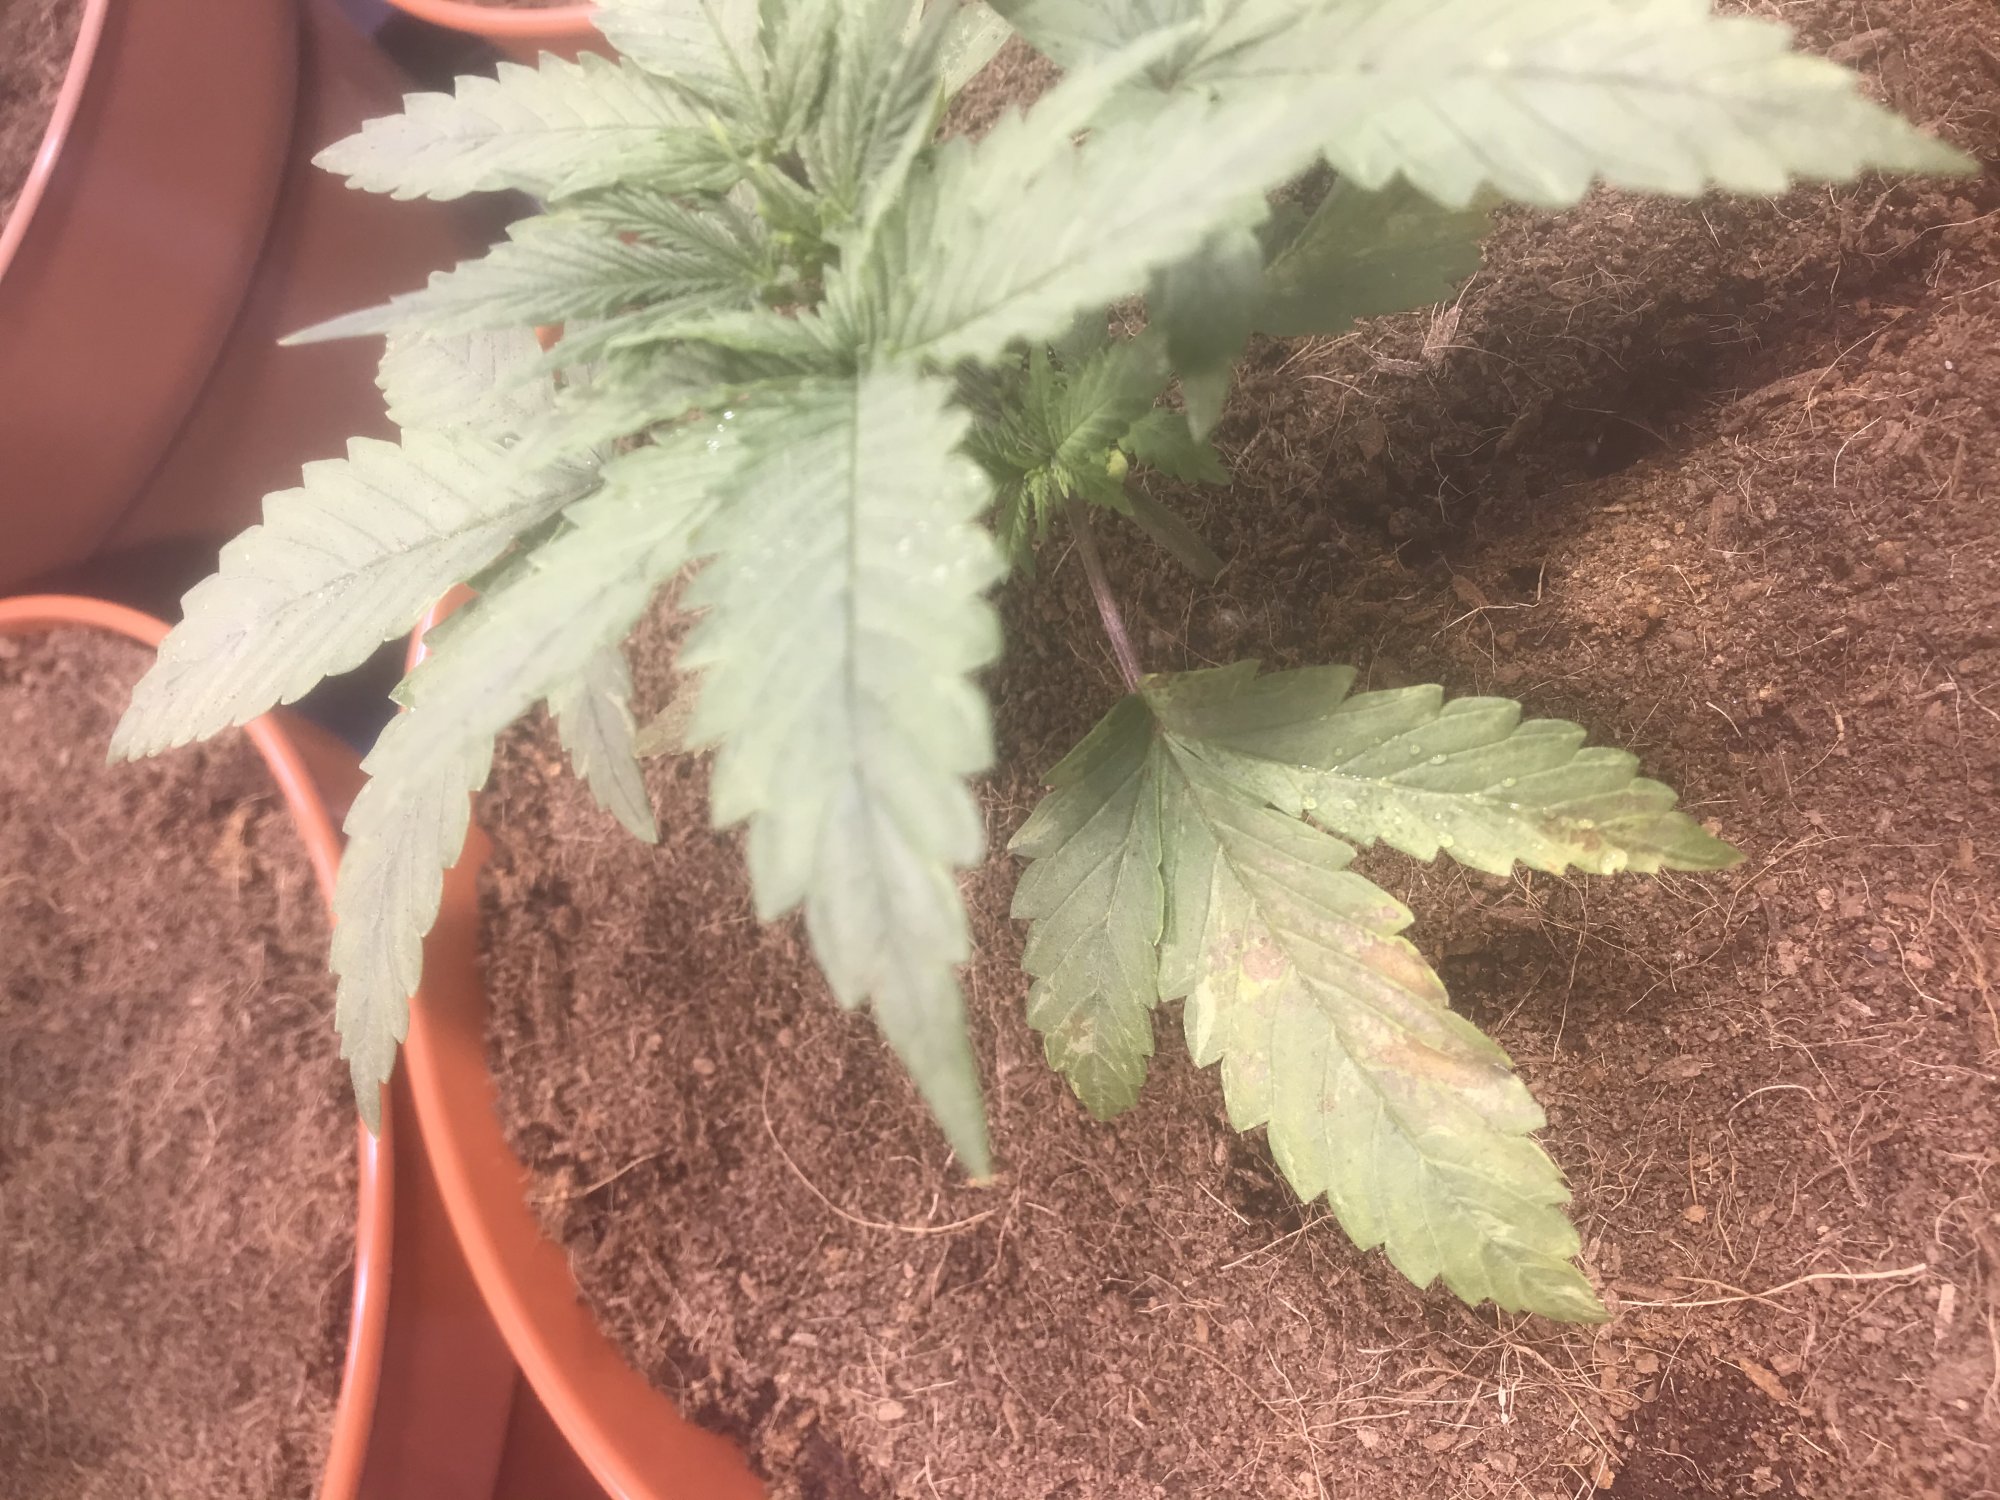 Variegated pattern twisted leaves and chlorosis 4